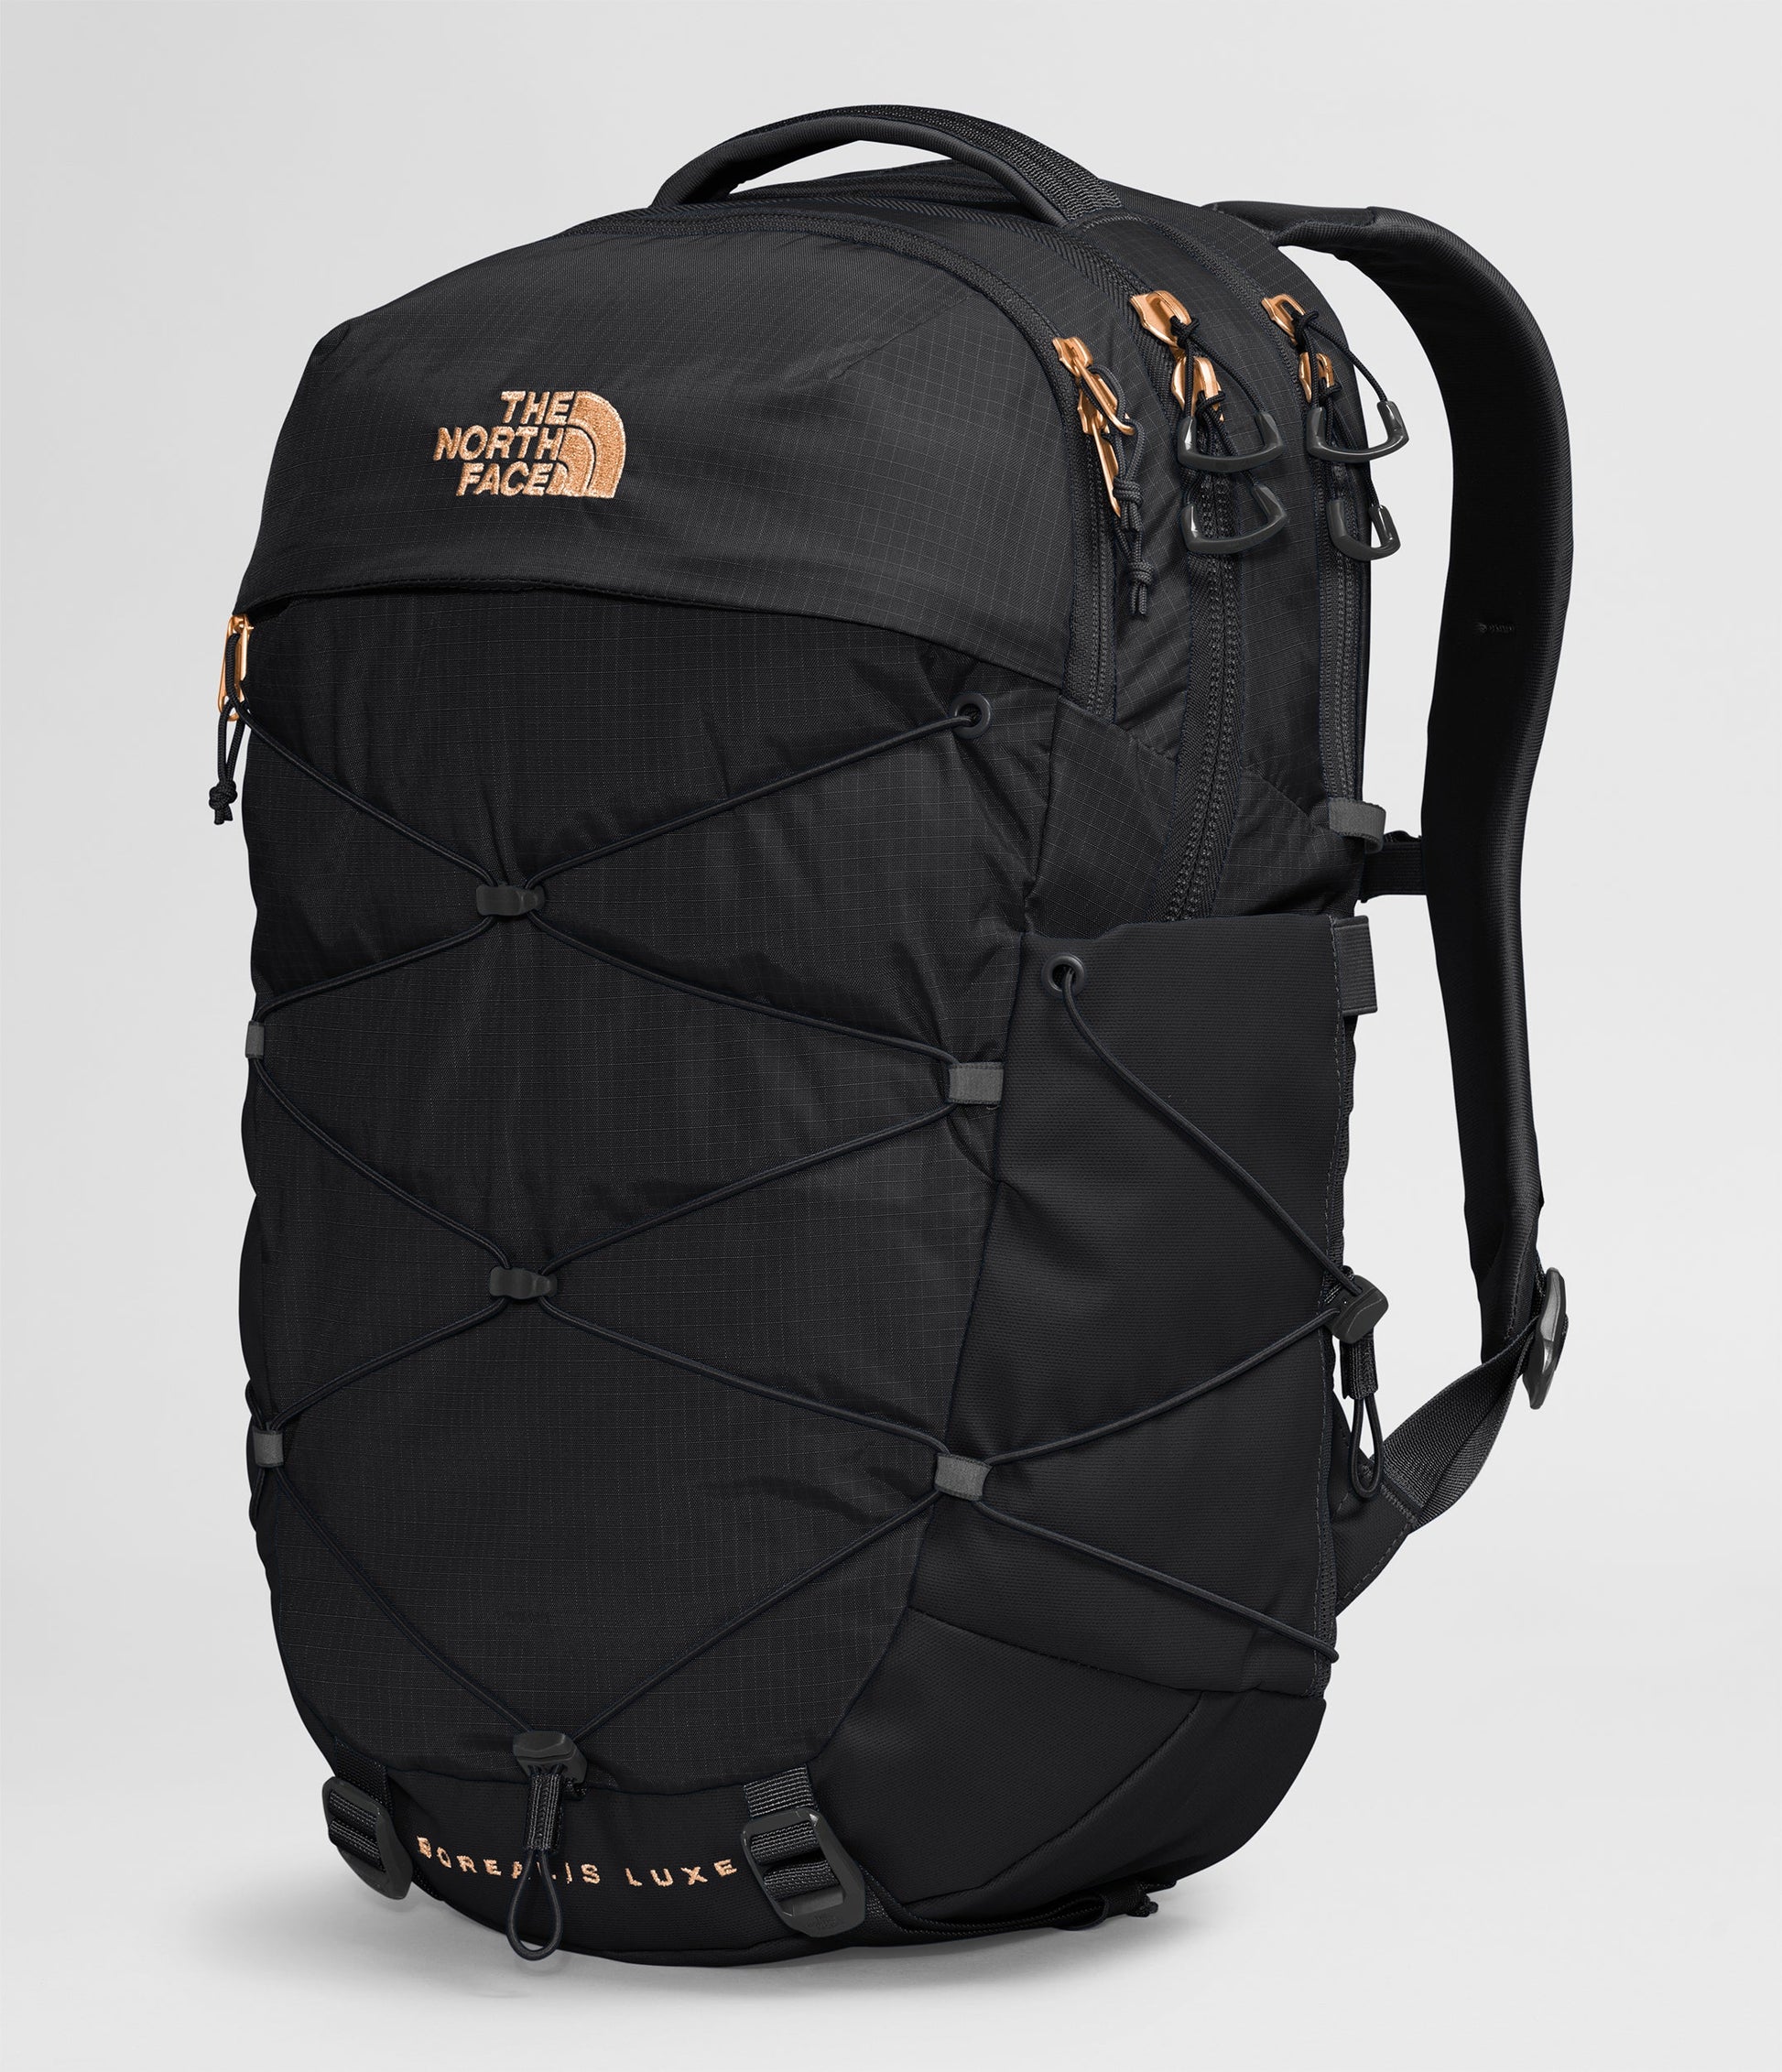 The North Face Women's Borealis Luxe Backpack - TNF Black/Burnt Coral Metallic